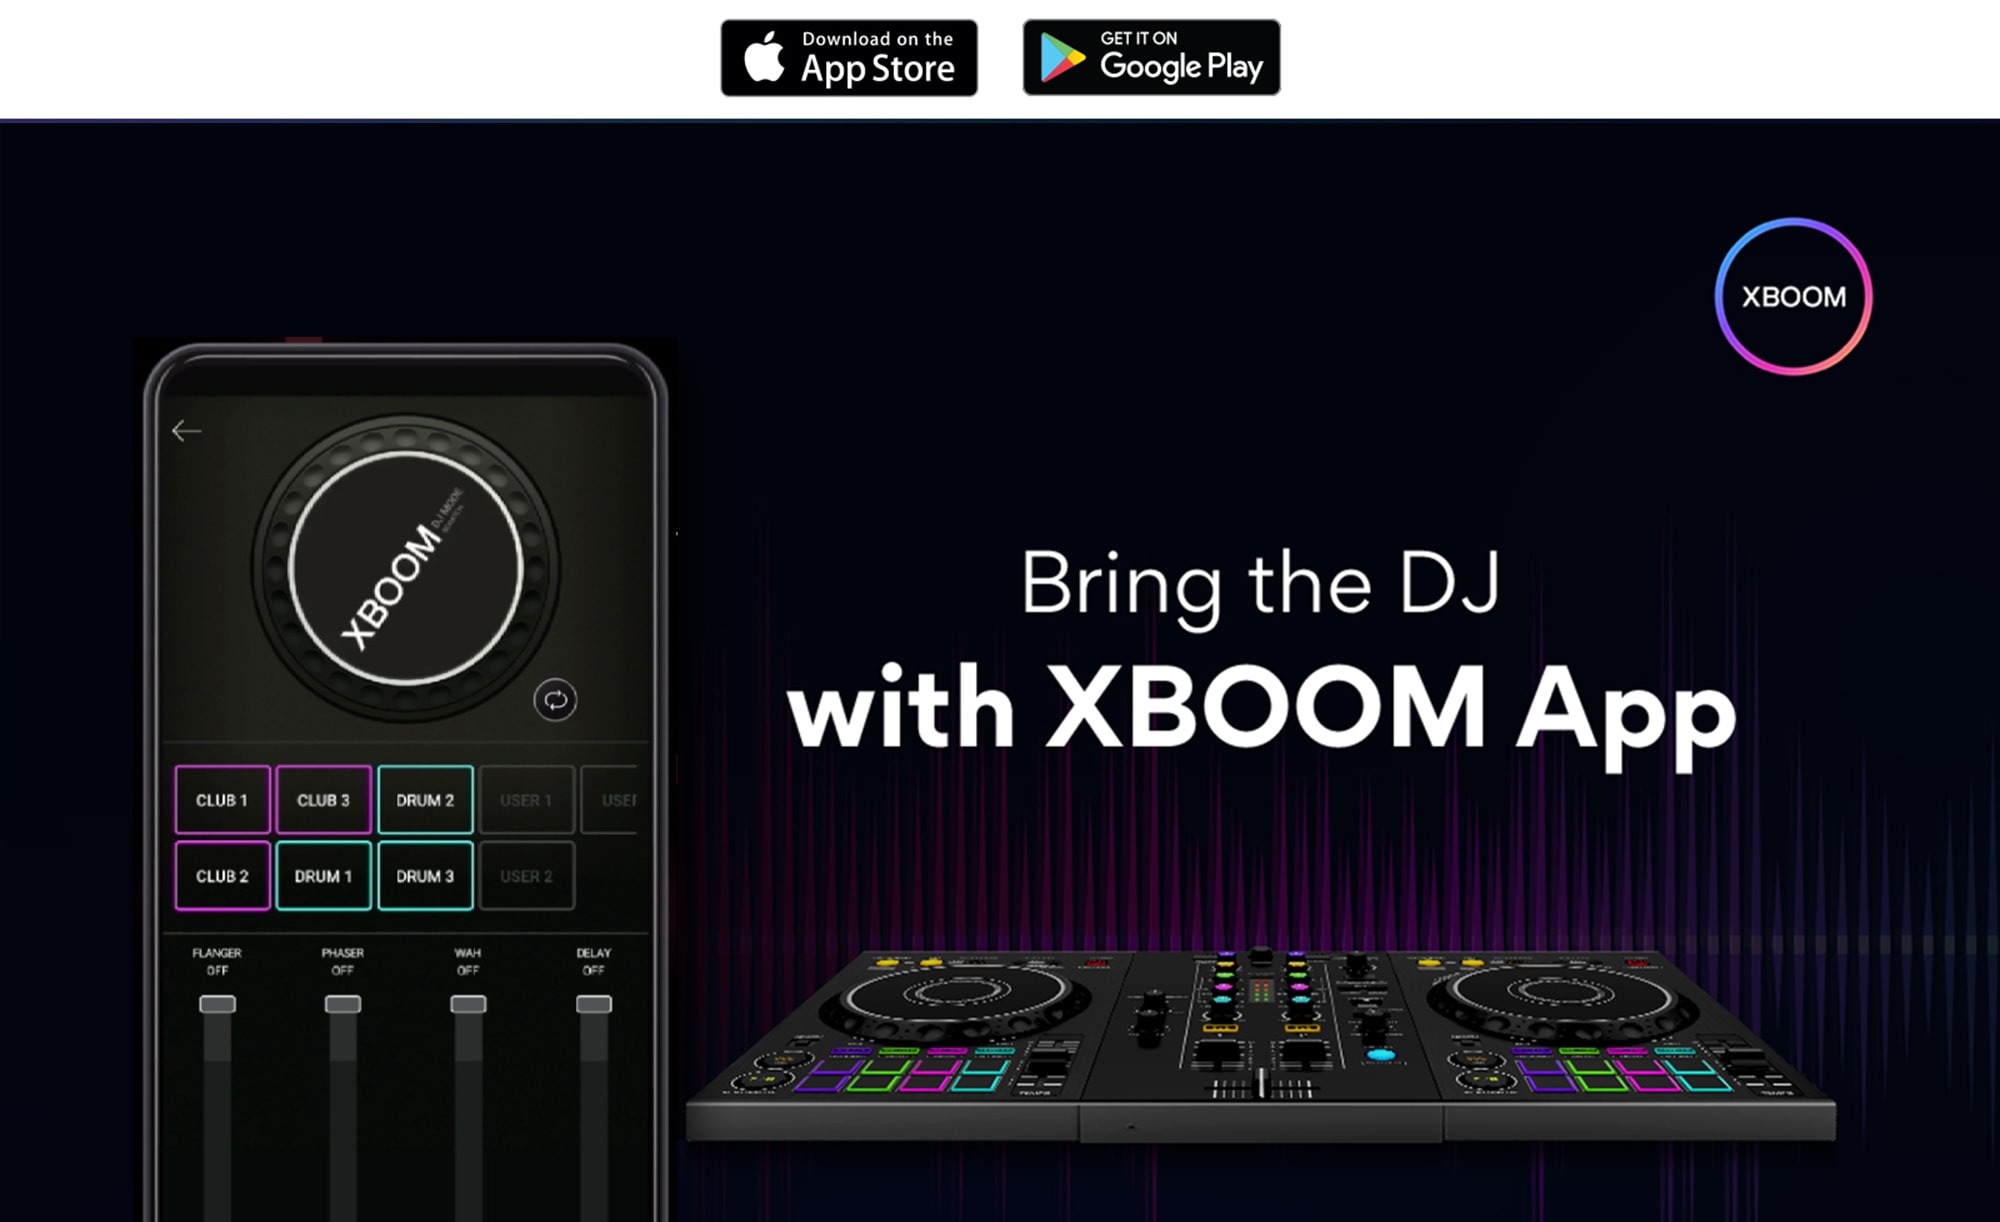 An image of a mobile phone showing the DJ MODE of the APP, and an actual DJ PAD next to it. At the top of the image is the XBOOM APP logo.